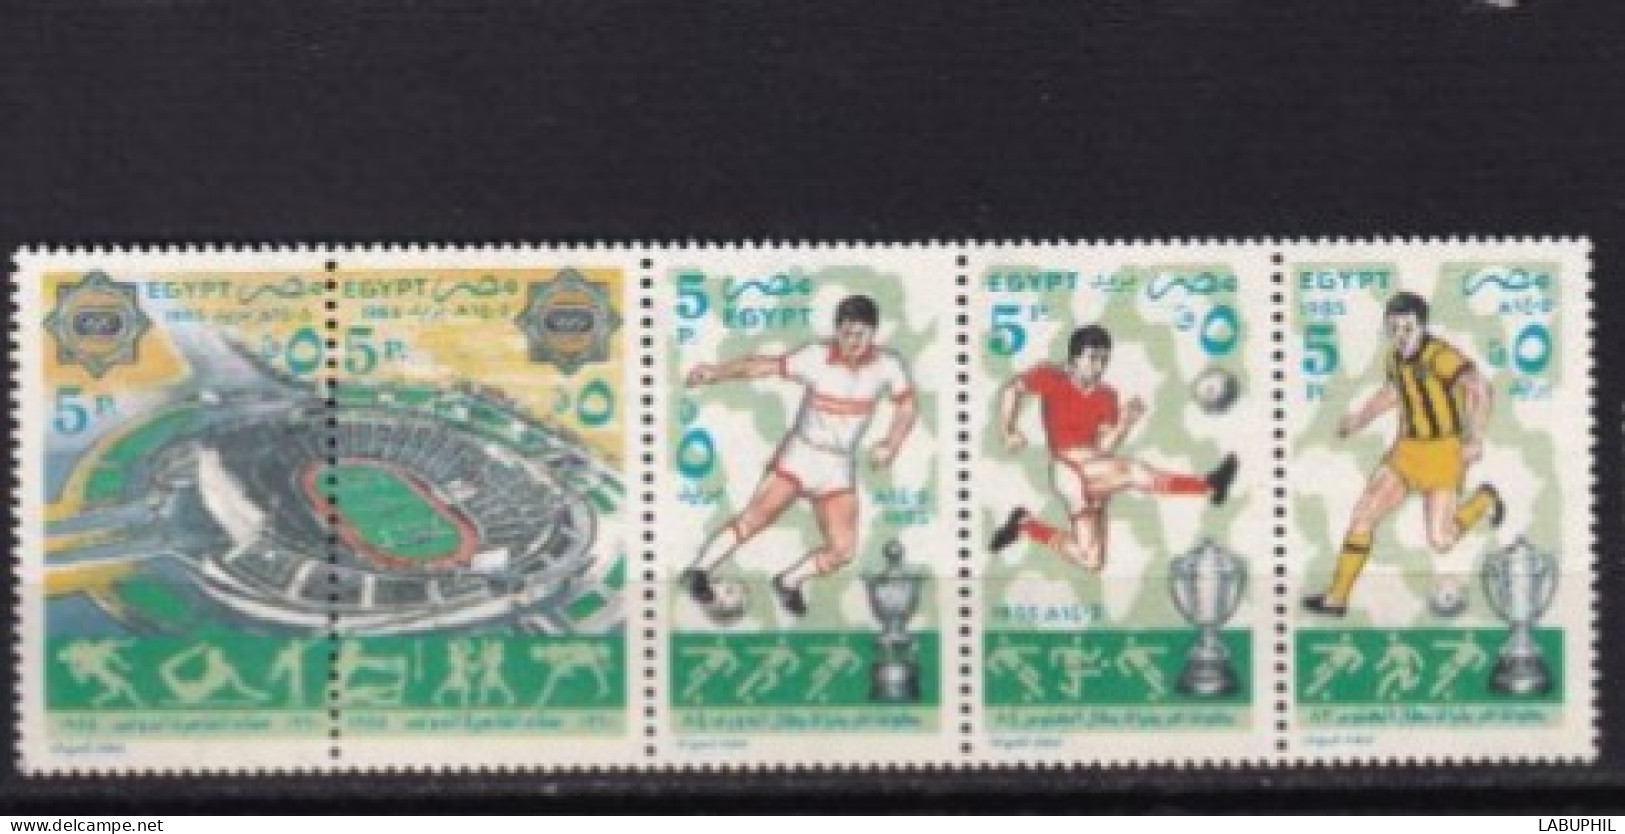 EGYPTE MNH ** 1985 Sport Foot - Unused Stamps